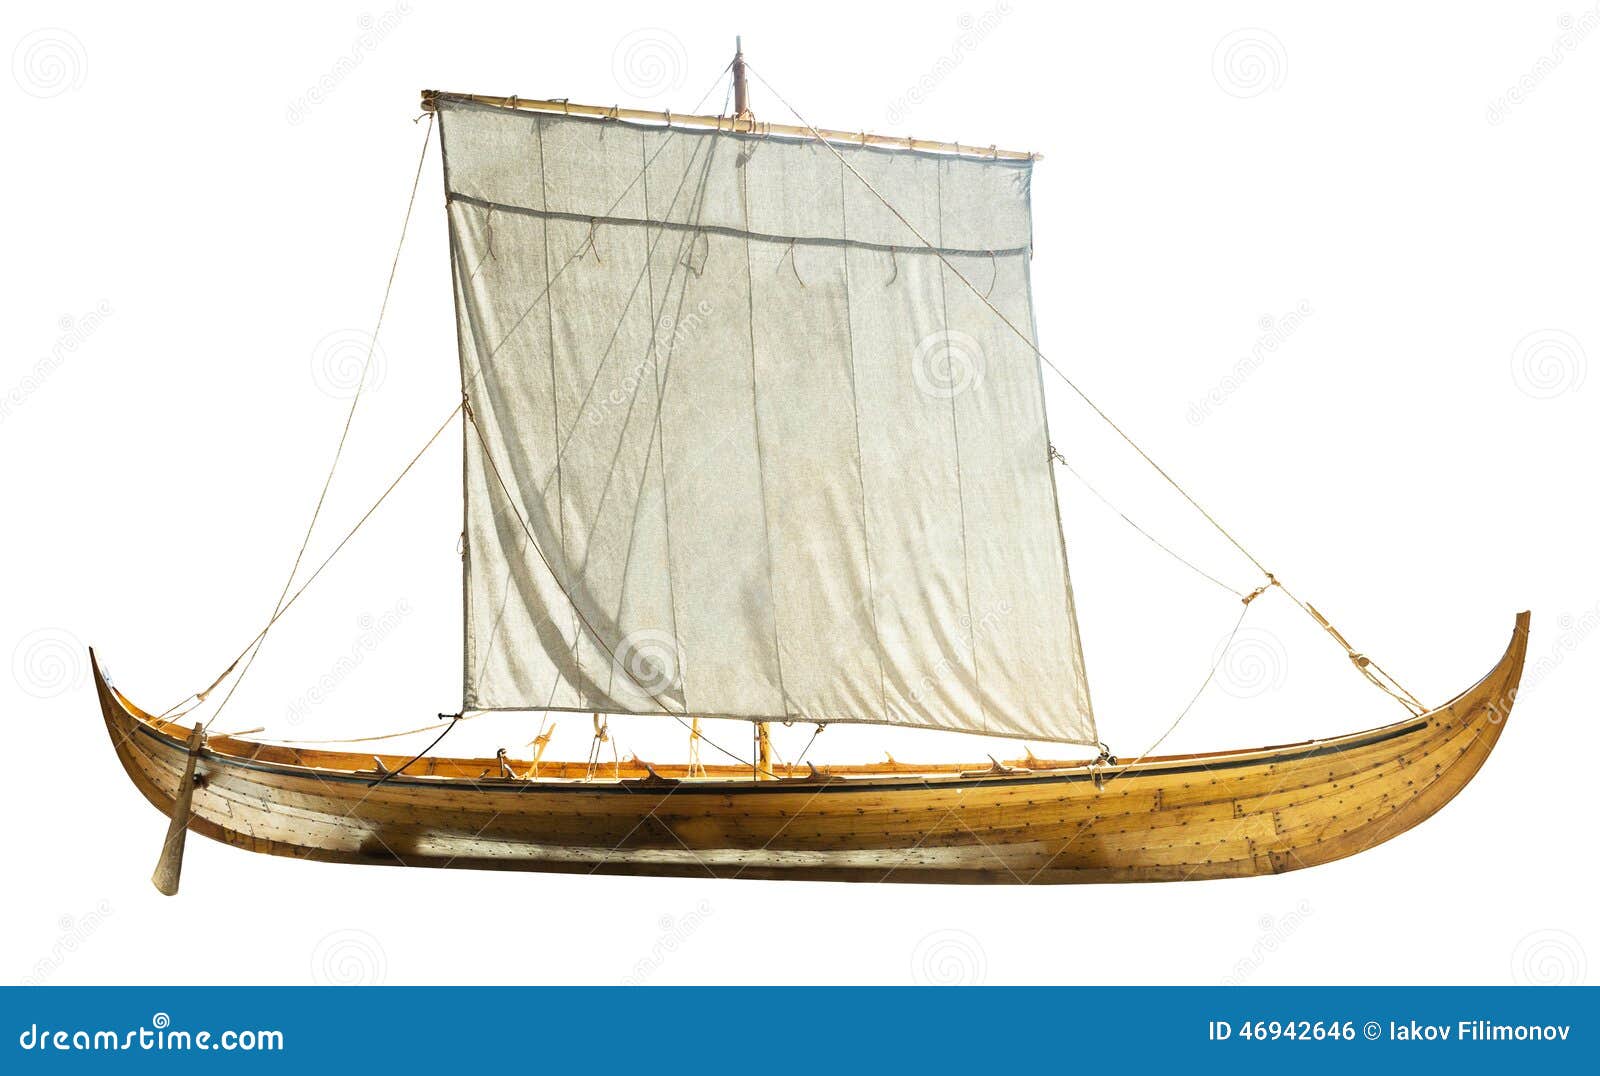 wooden boat with sails unfurled